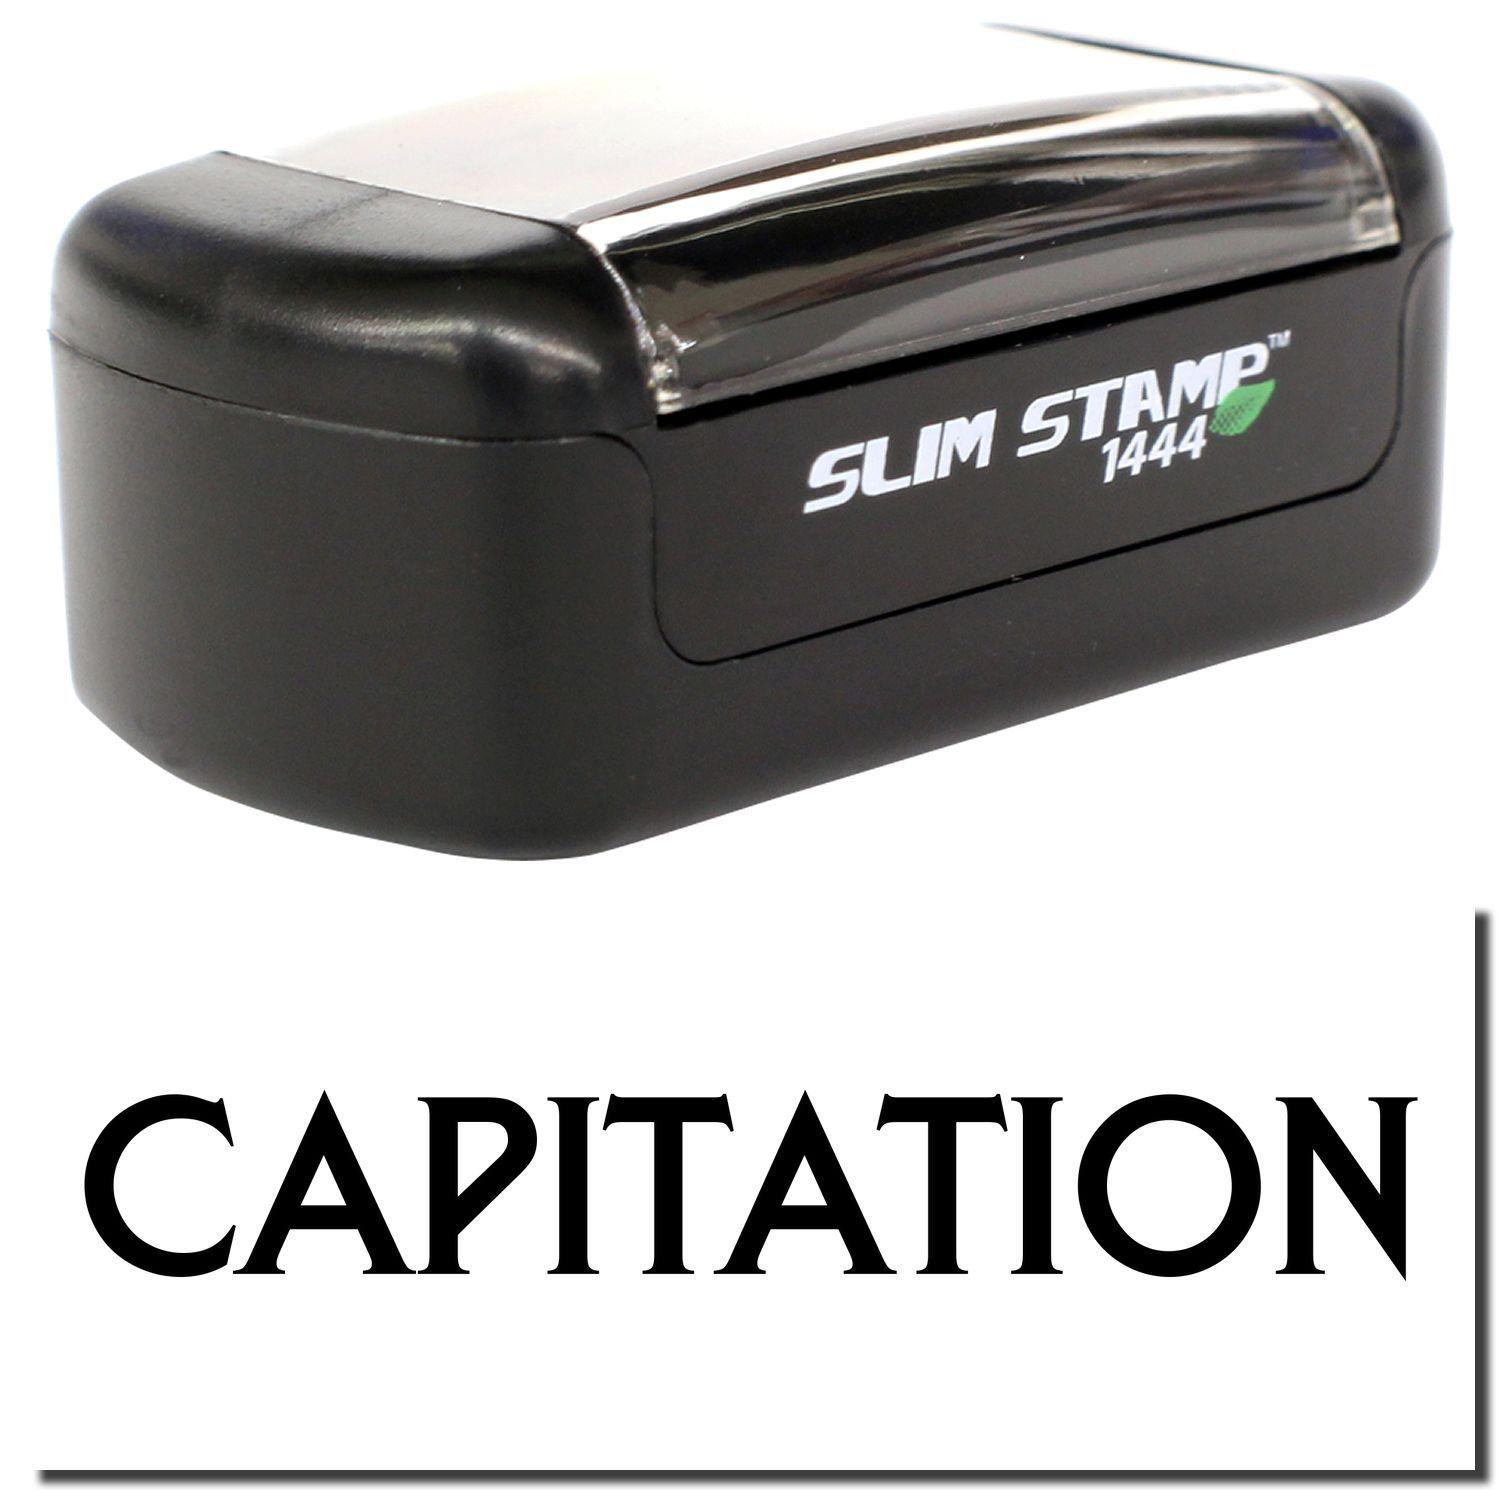 A stock office pre-inked stamp with a stamped image showing how the text "CAPITATION" is displayed after stamping.